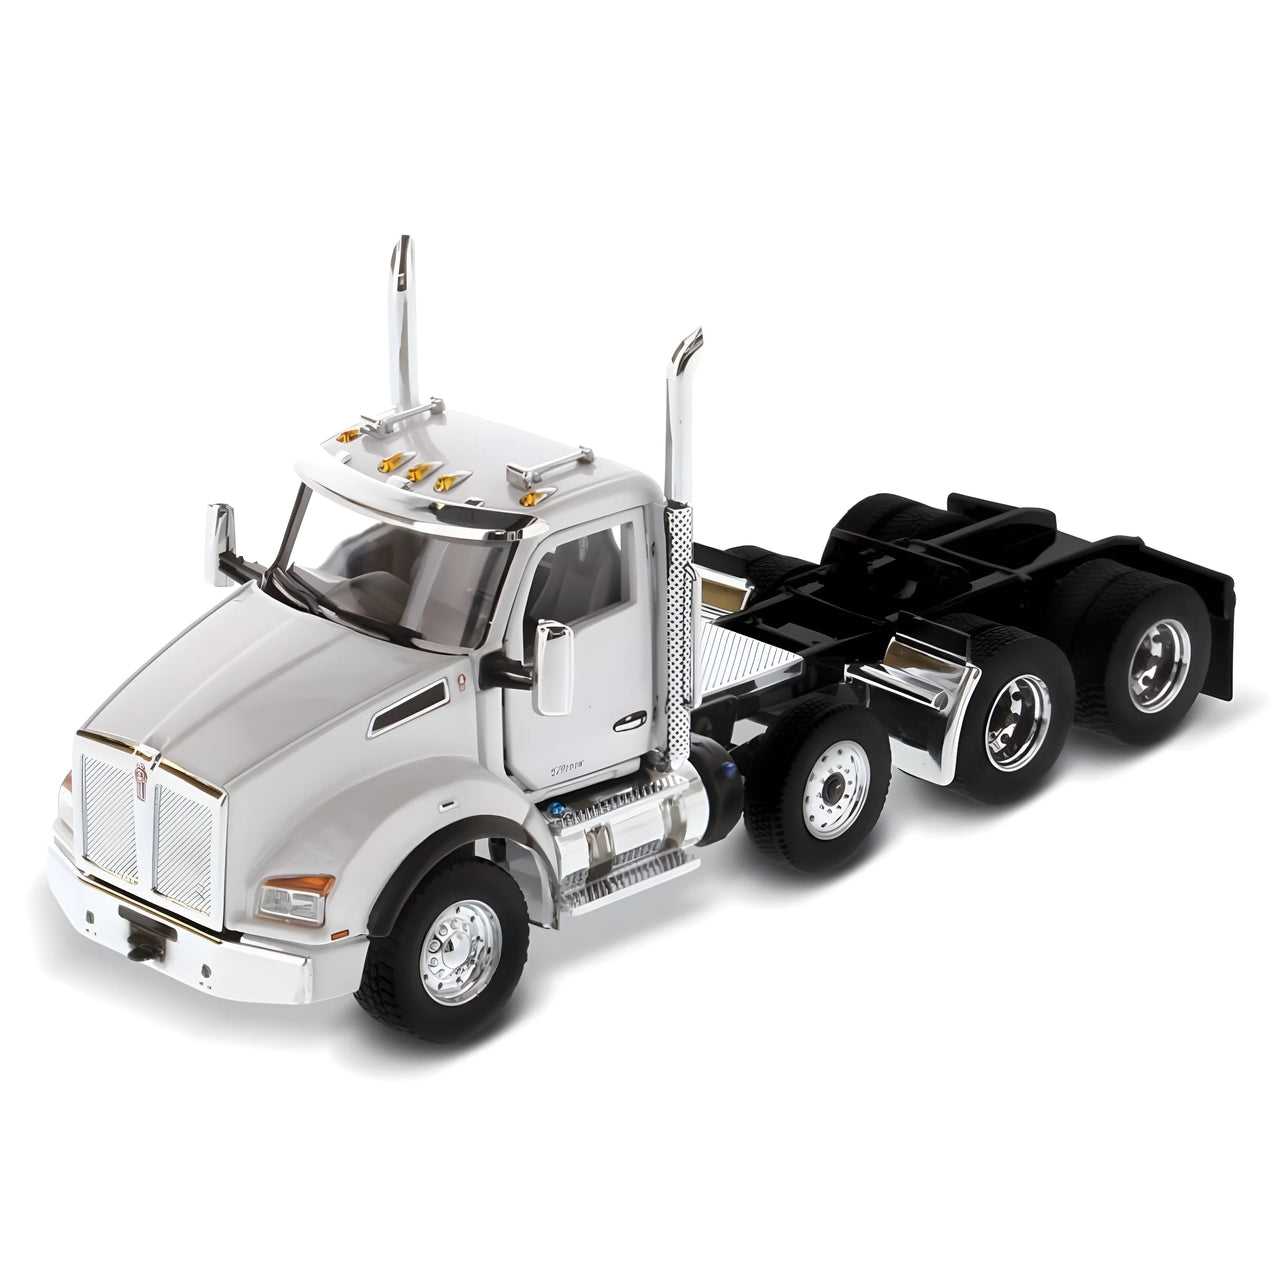 71058 Kenworth T880 Tractor Truck 1:50 Scale